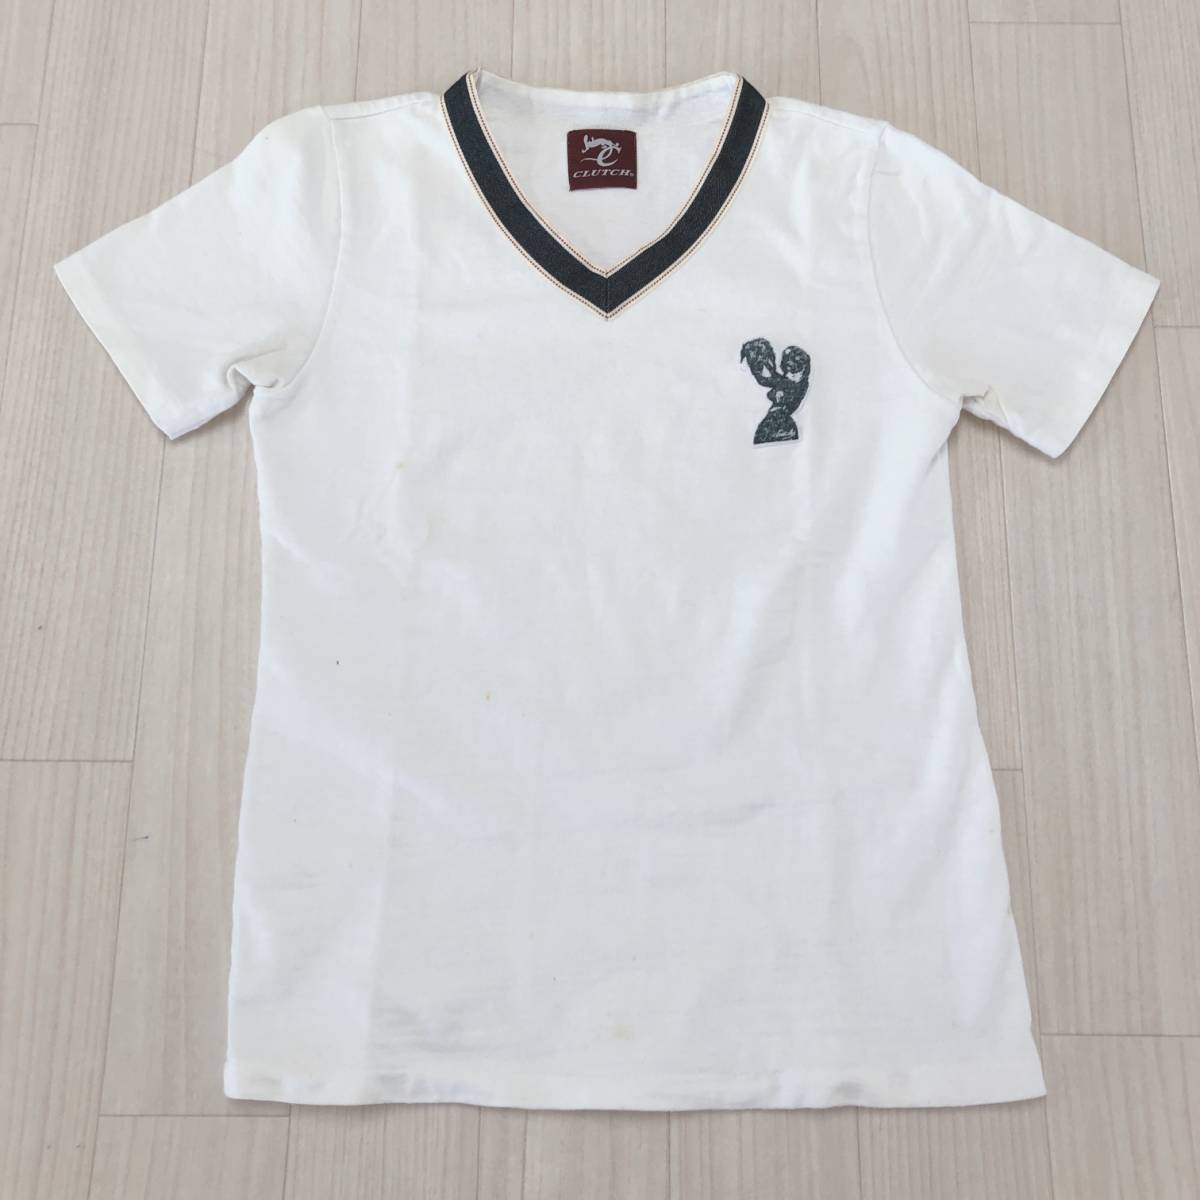 AS0900 CLUTCH clutch tops T-shirt short sleeves badge F size free size white cotton 100% cotton simple tei Lee casual 